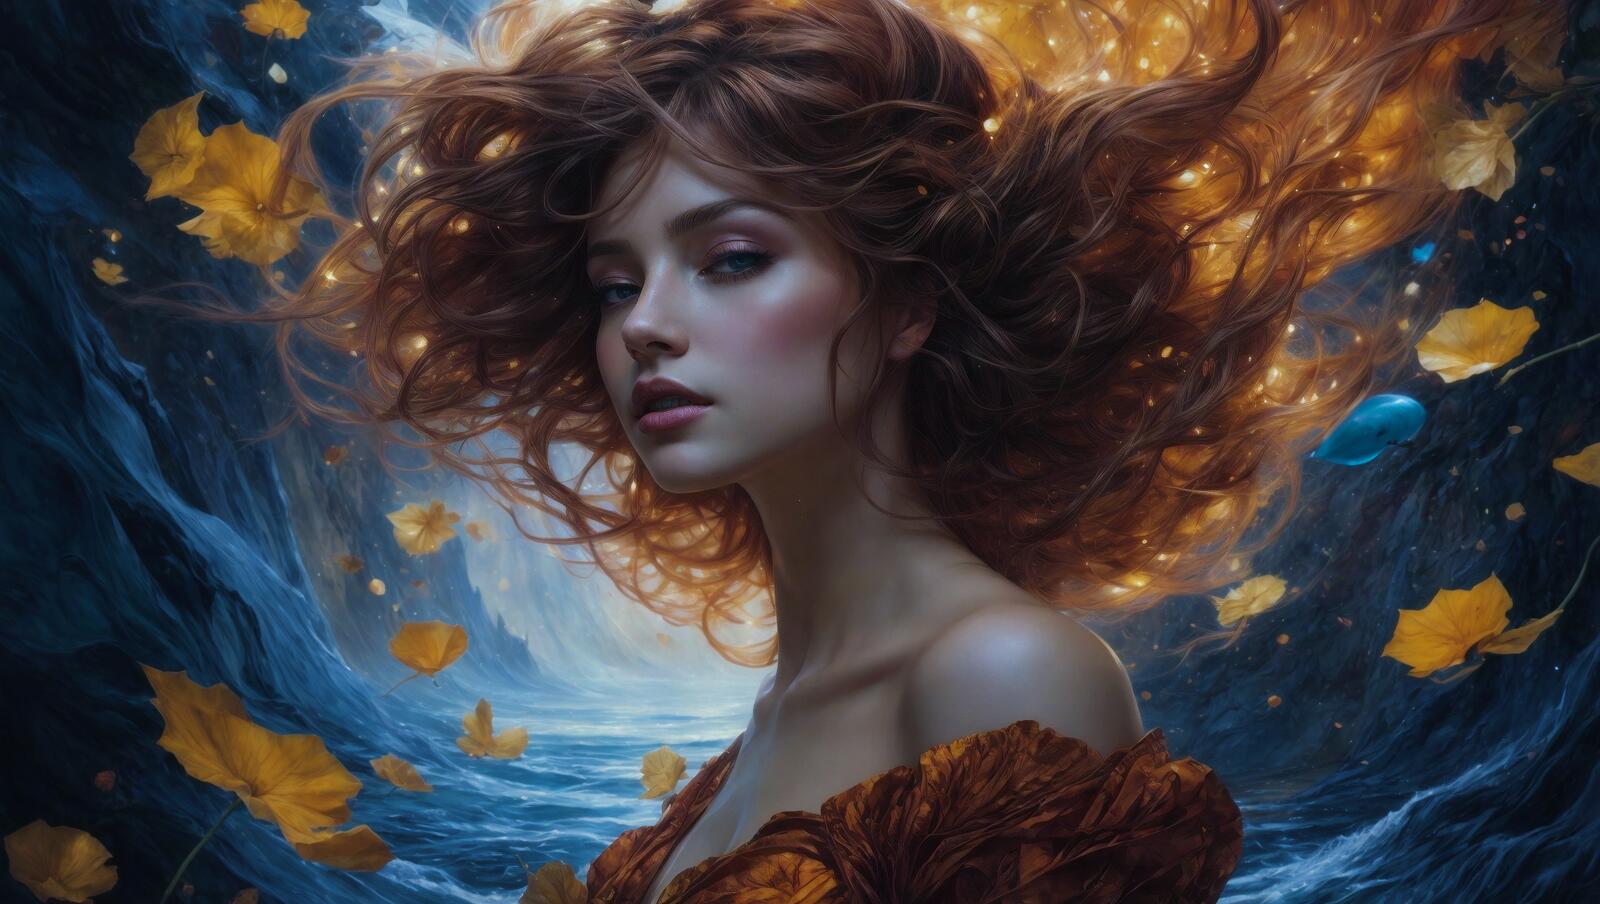 Free photo An artistic painting of a woman with red hair